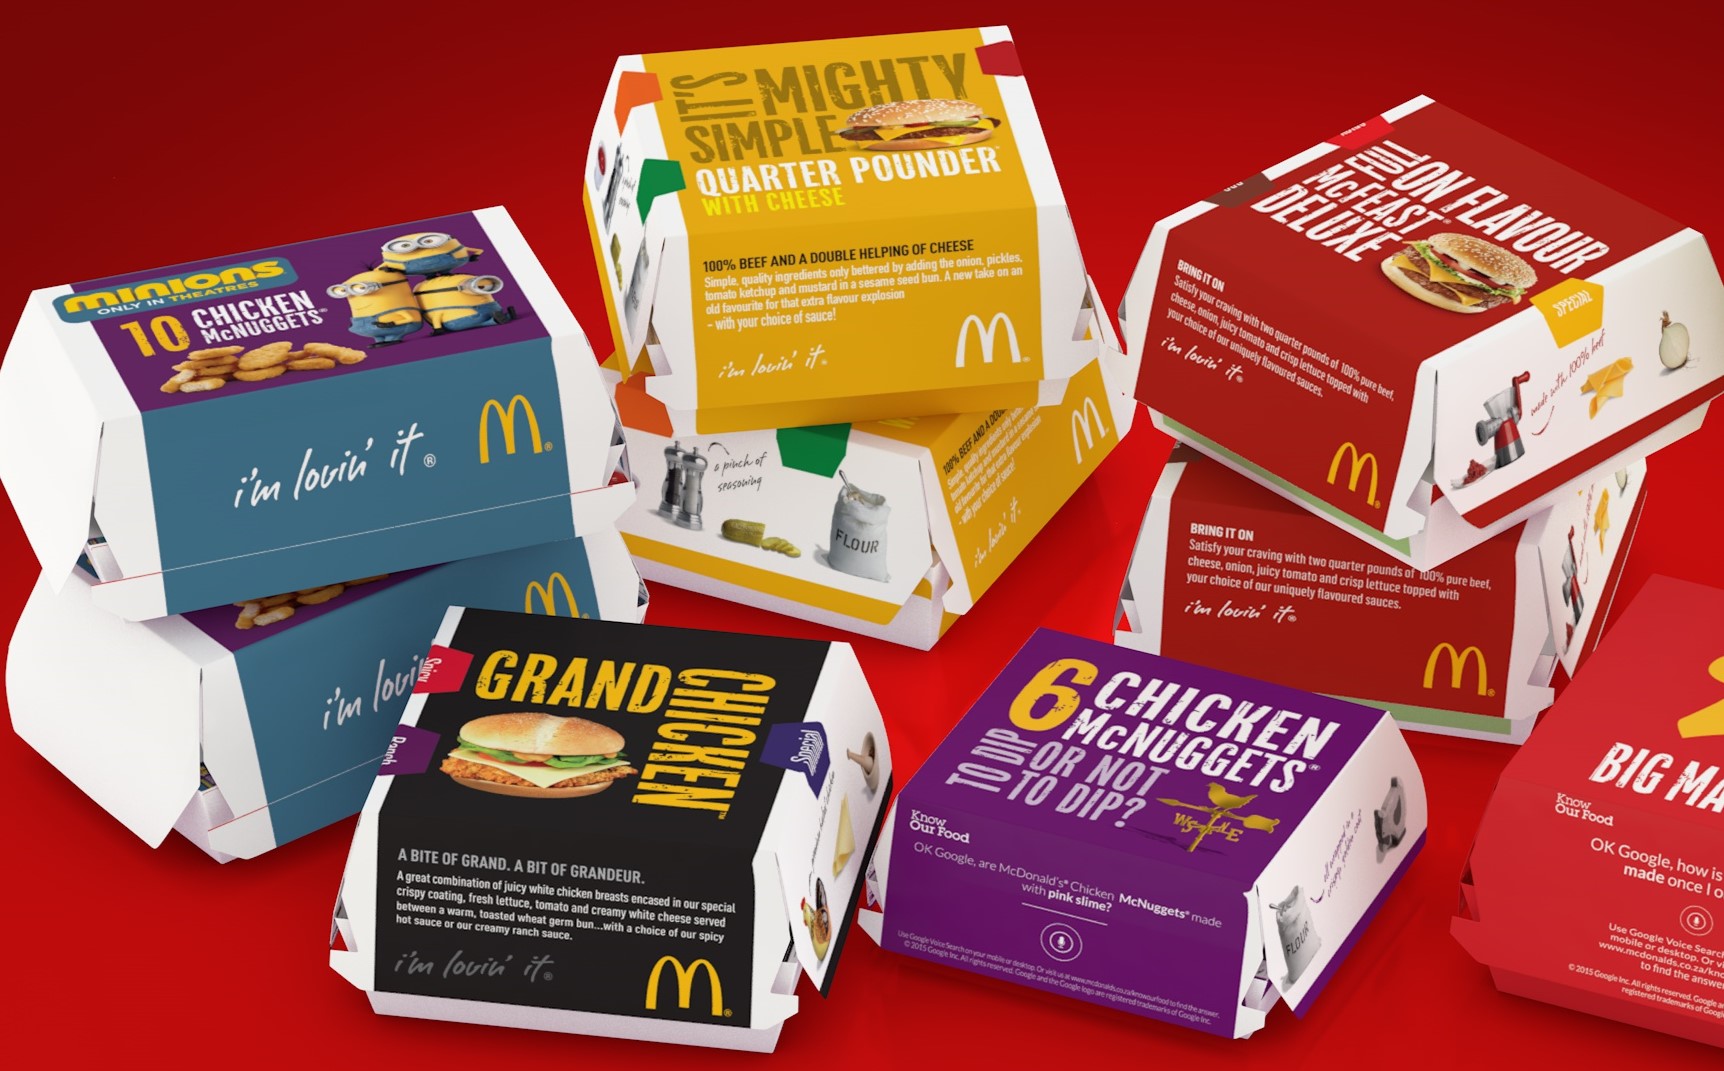 new container design for mcdonalds south africa - by berge farrell design